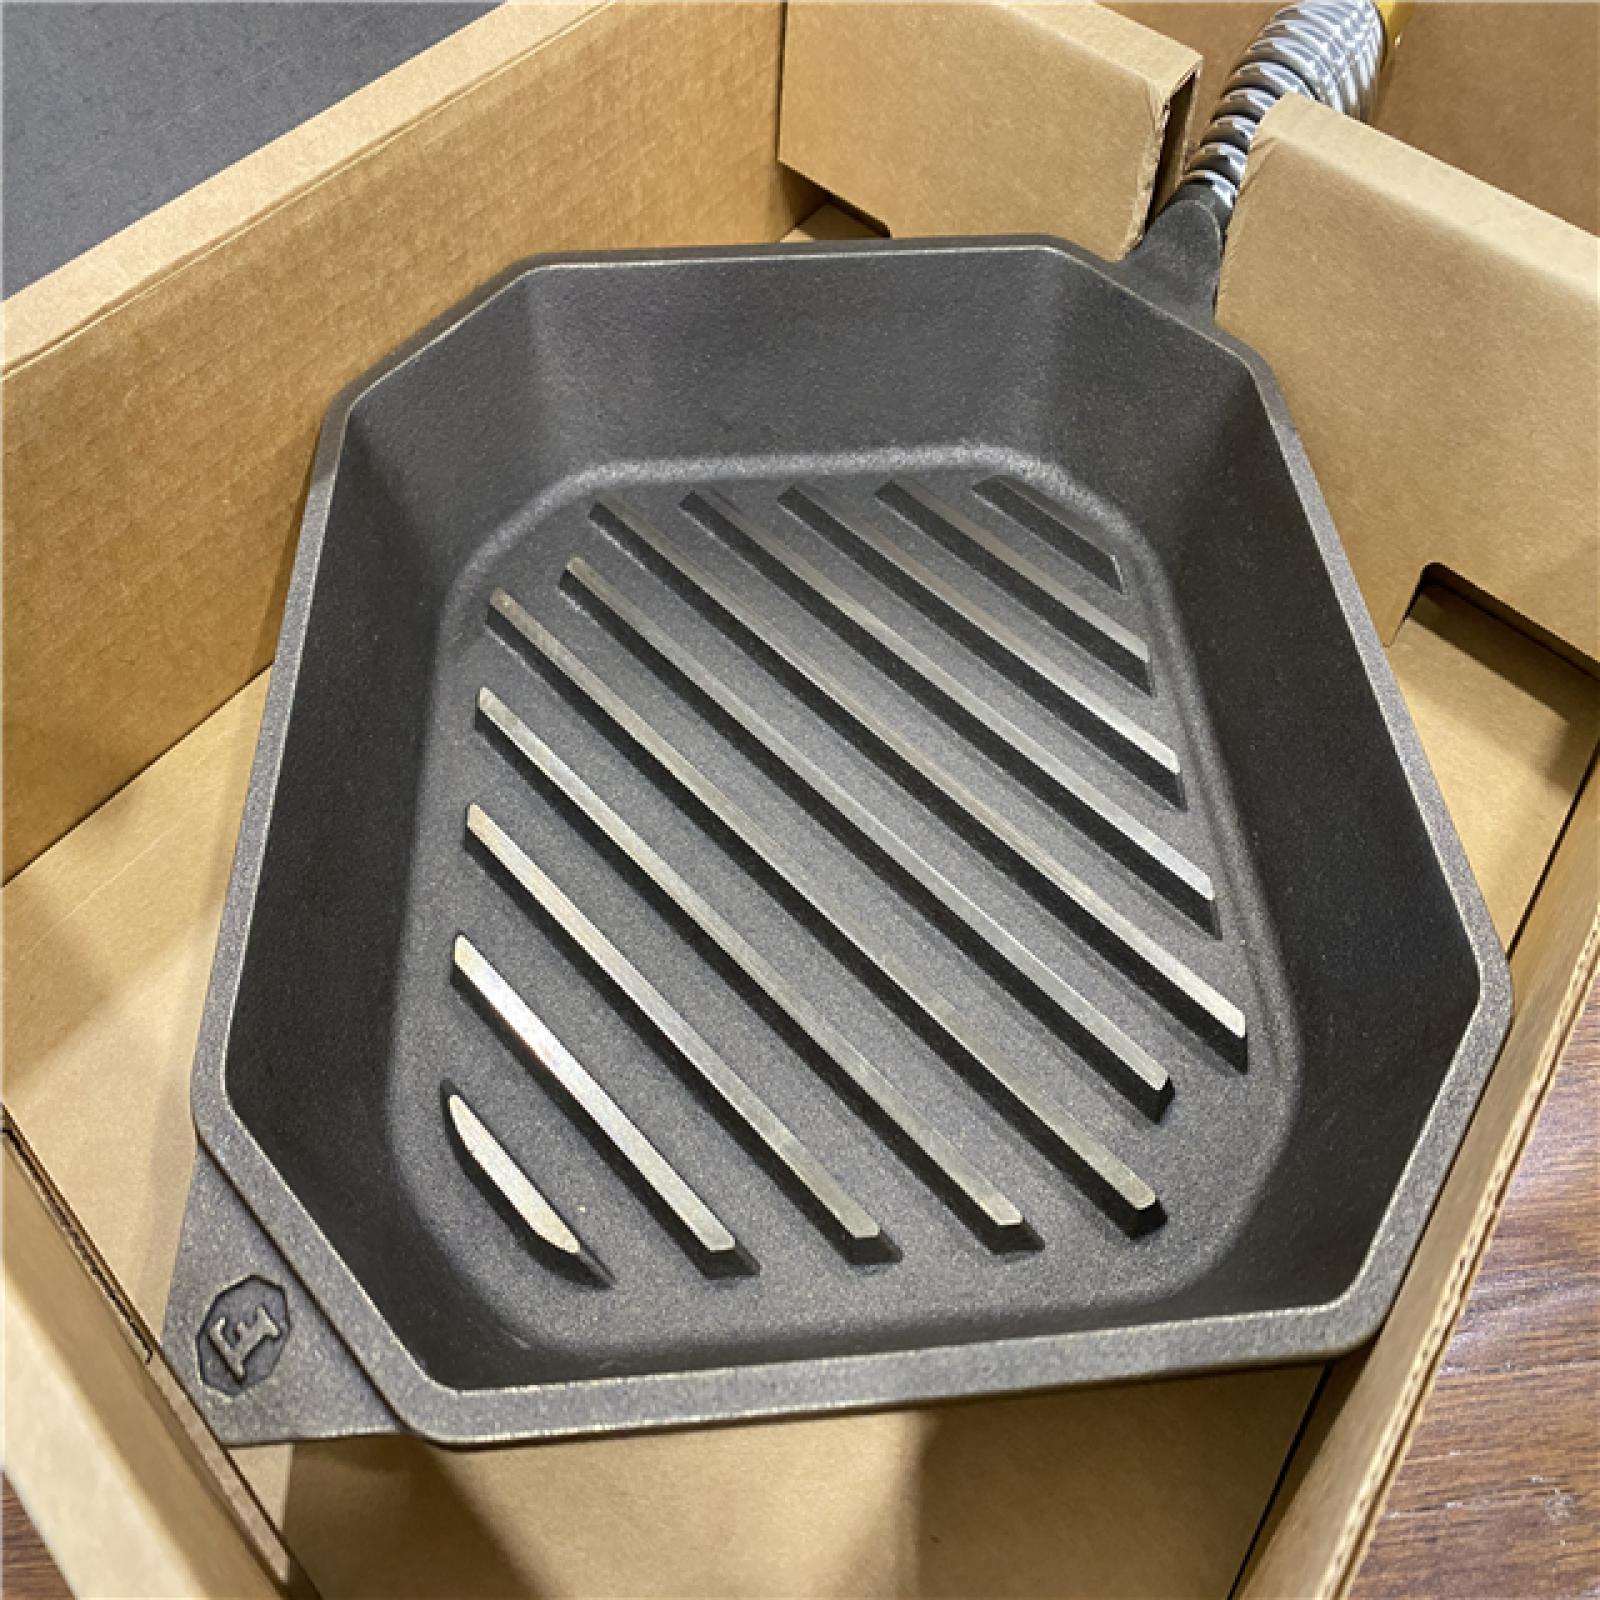 NEW! Finex Cast Iron Collection 11.6 in. Cast Iron Grill Pan in Iron Patina